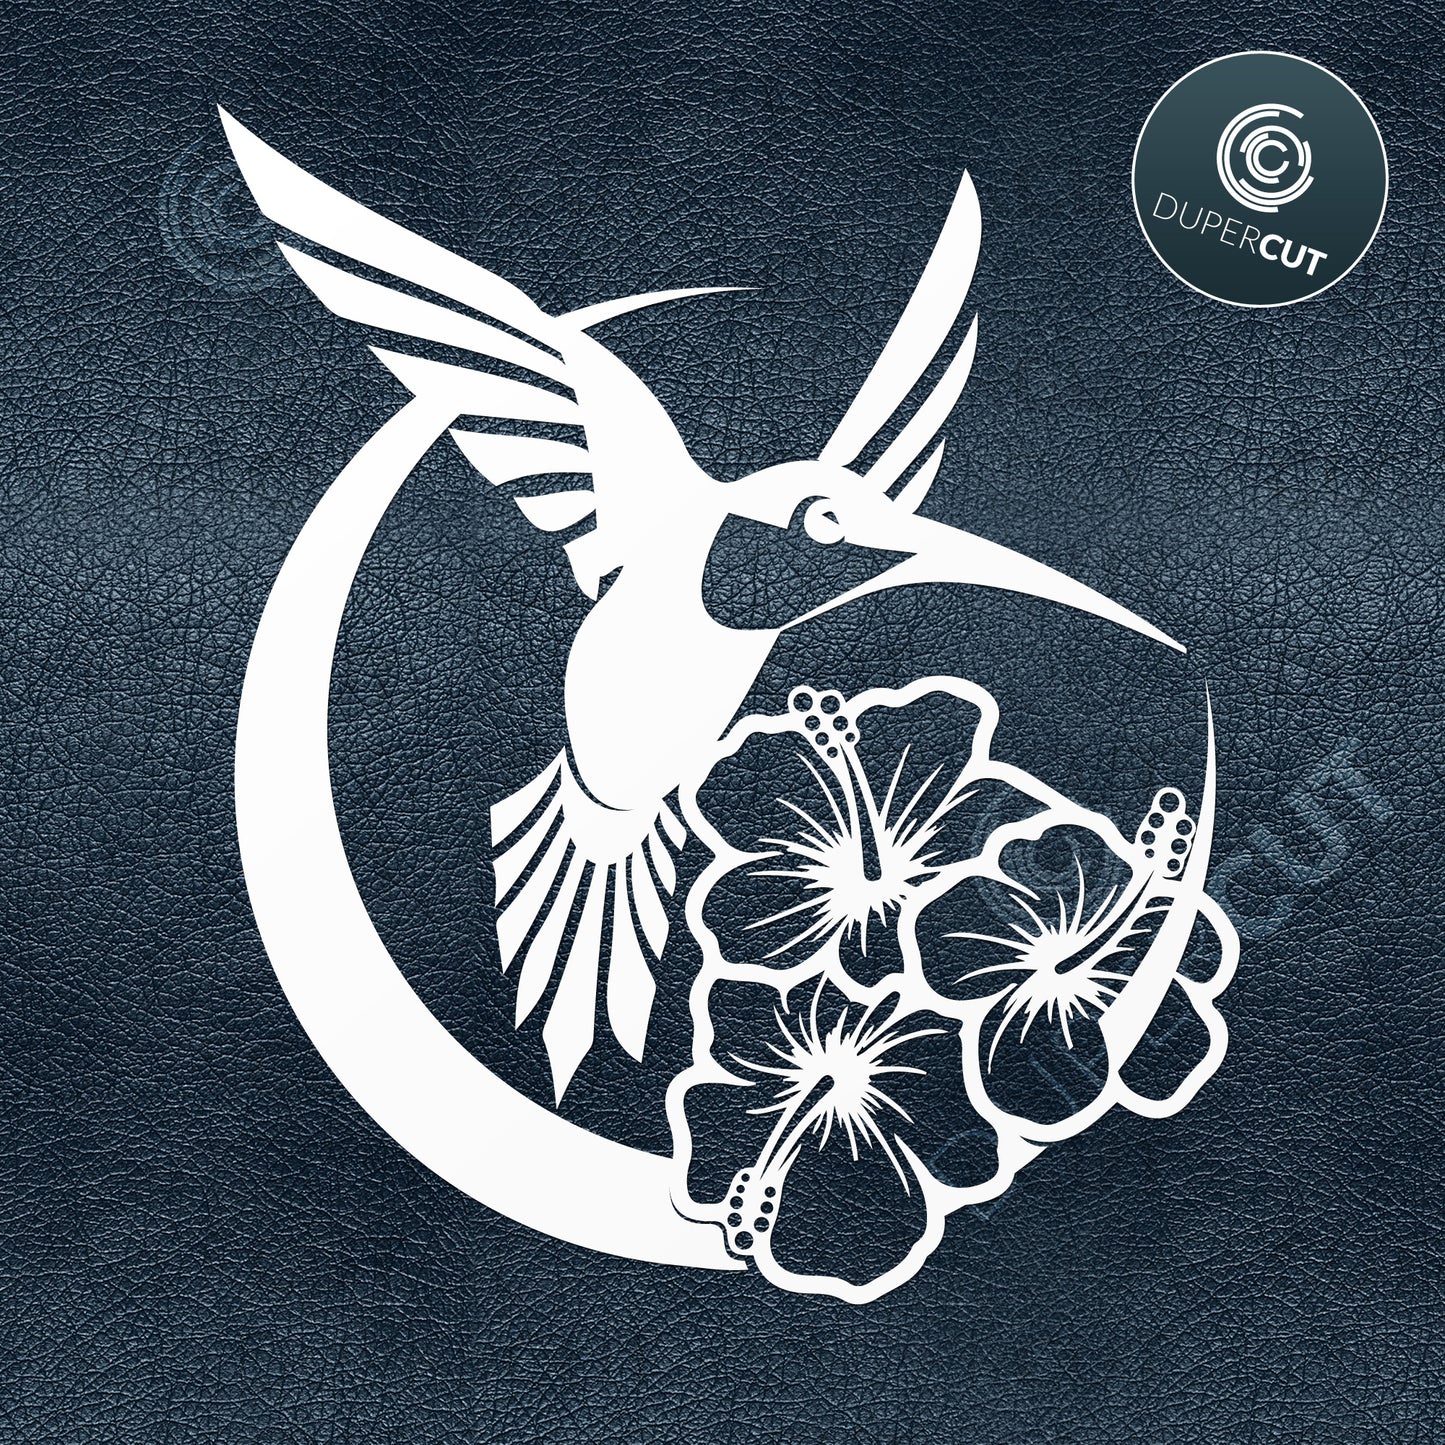 Hummingbird with flowers. Paper cutting template - Easy DIY project for beginners - SVG PNG DXF files for cutting machines: Cricut, Silhouette Cameo, Glowforge, CNC laser